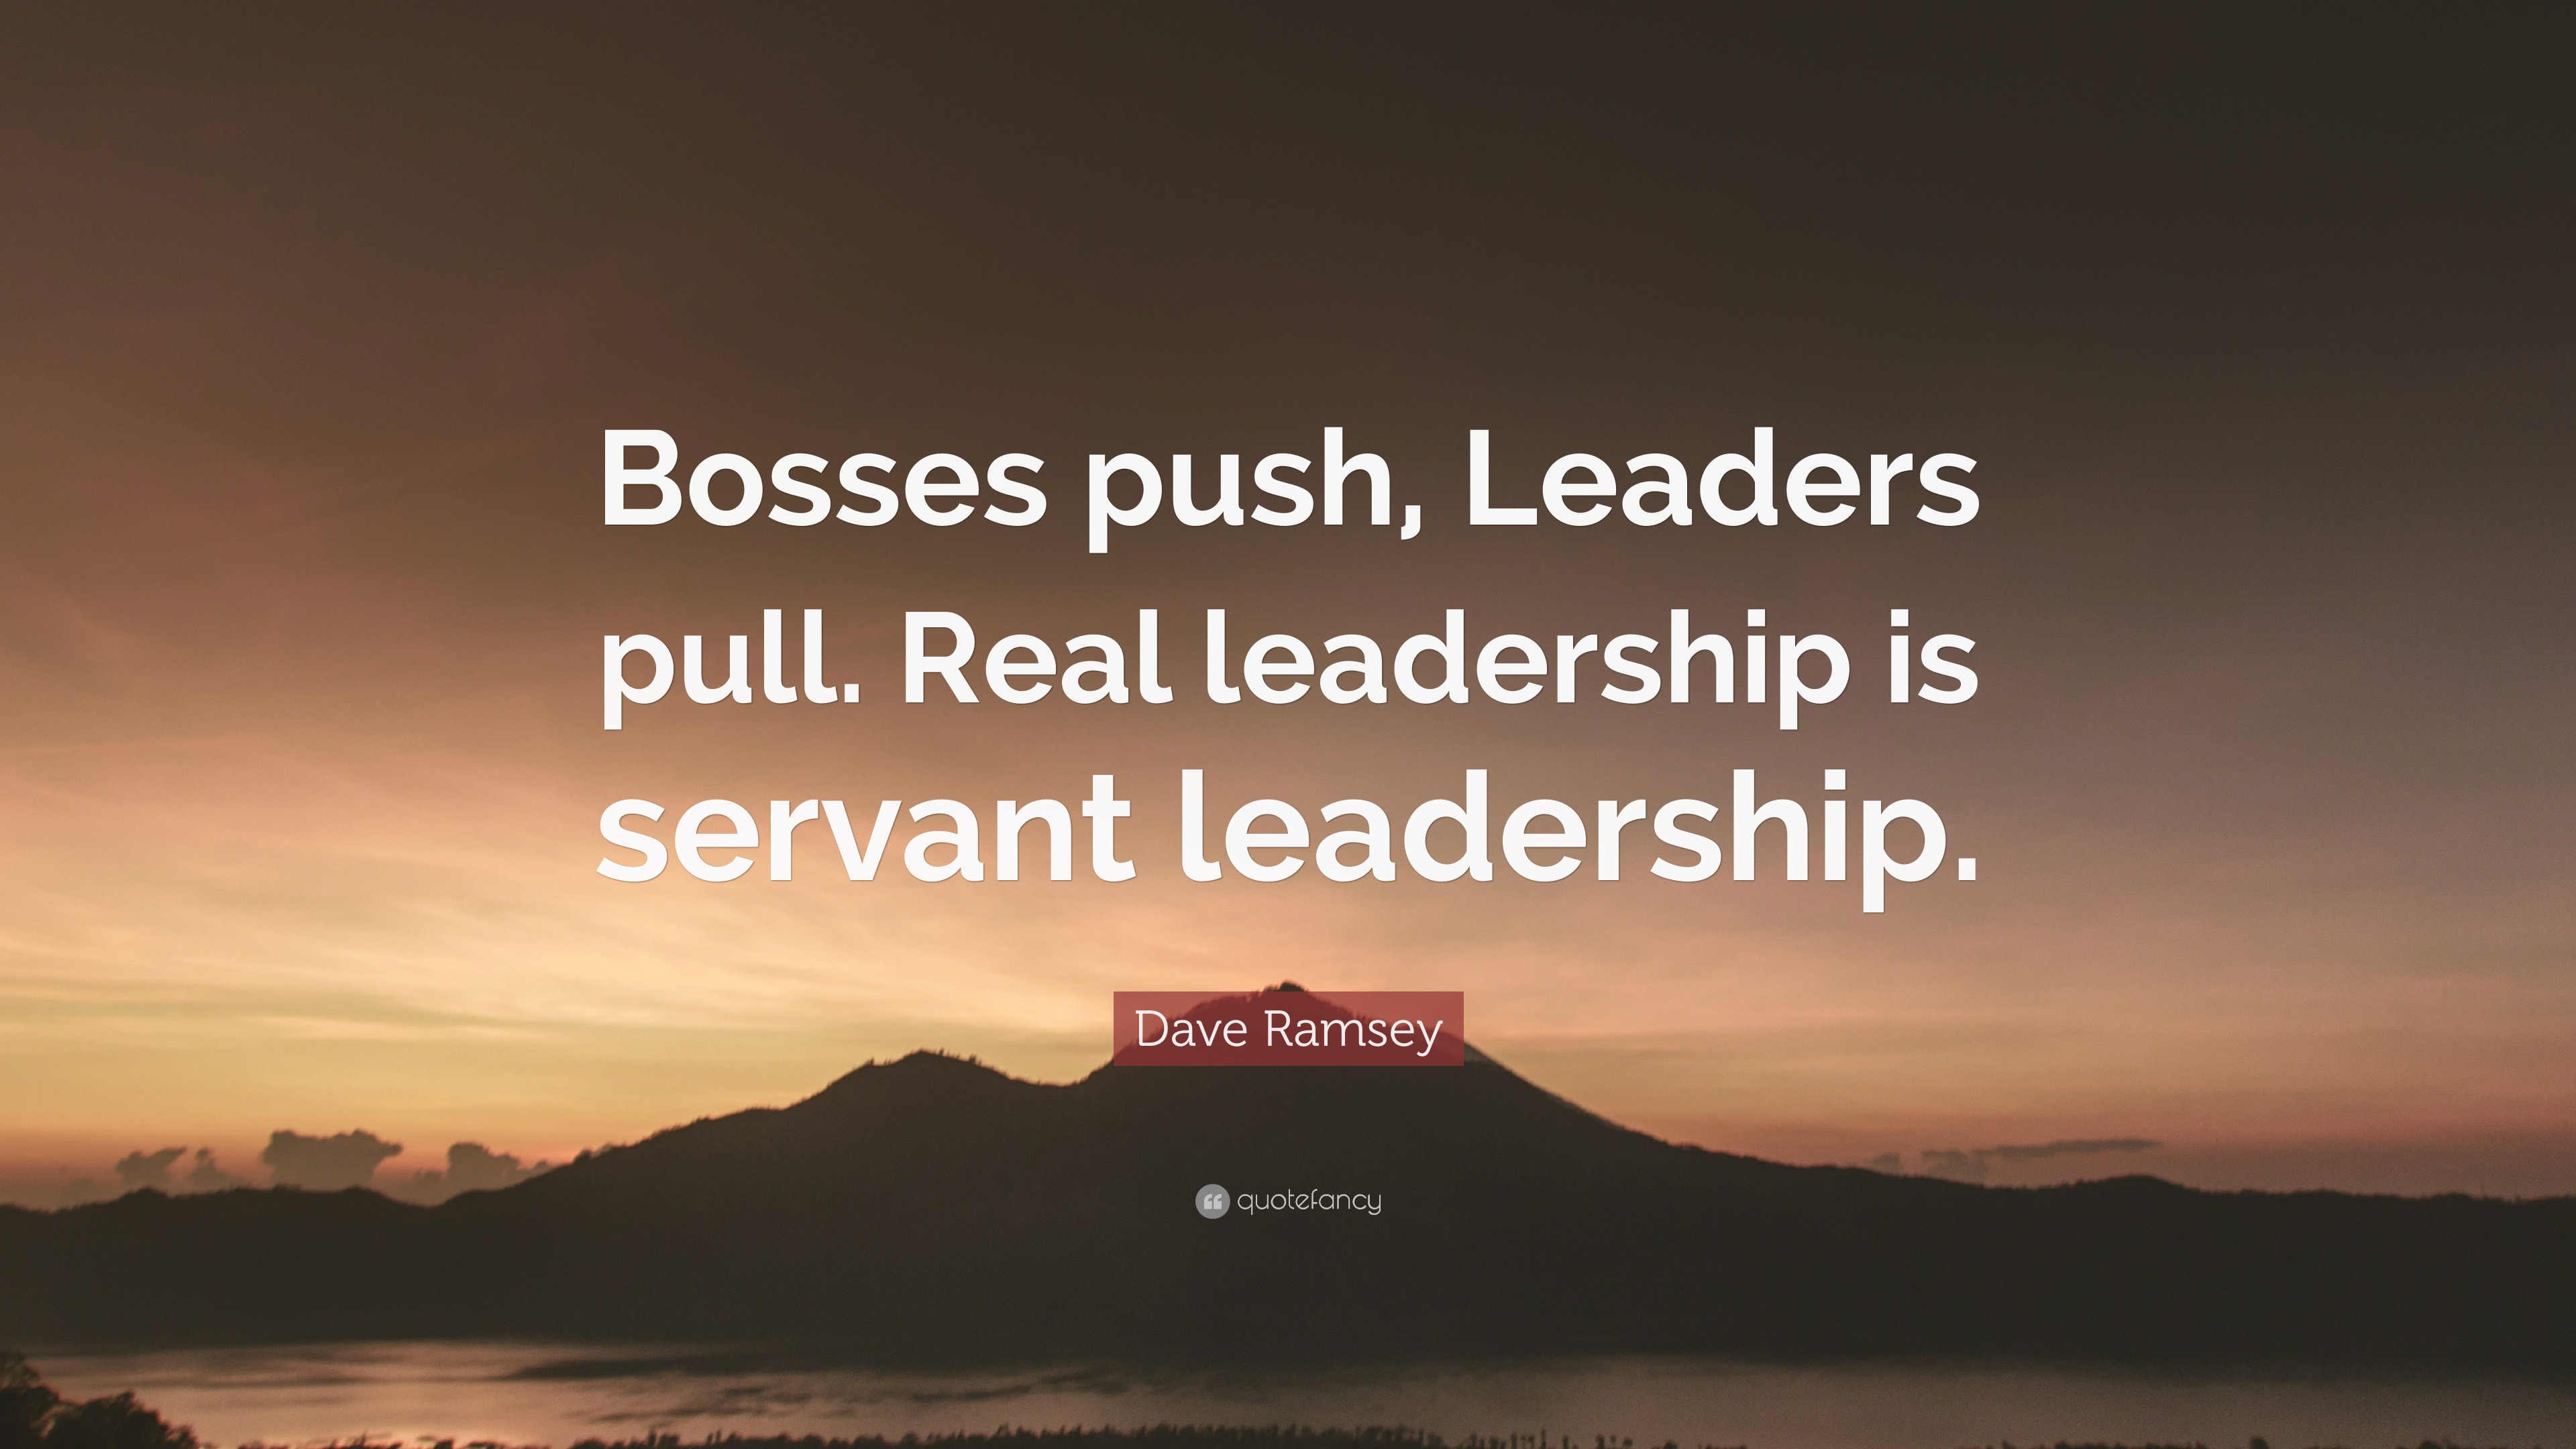 Dave Ramsey Quote: “Bosses push, Leaders pull. Real leadership is